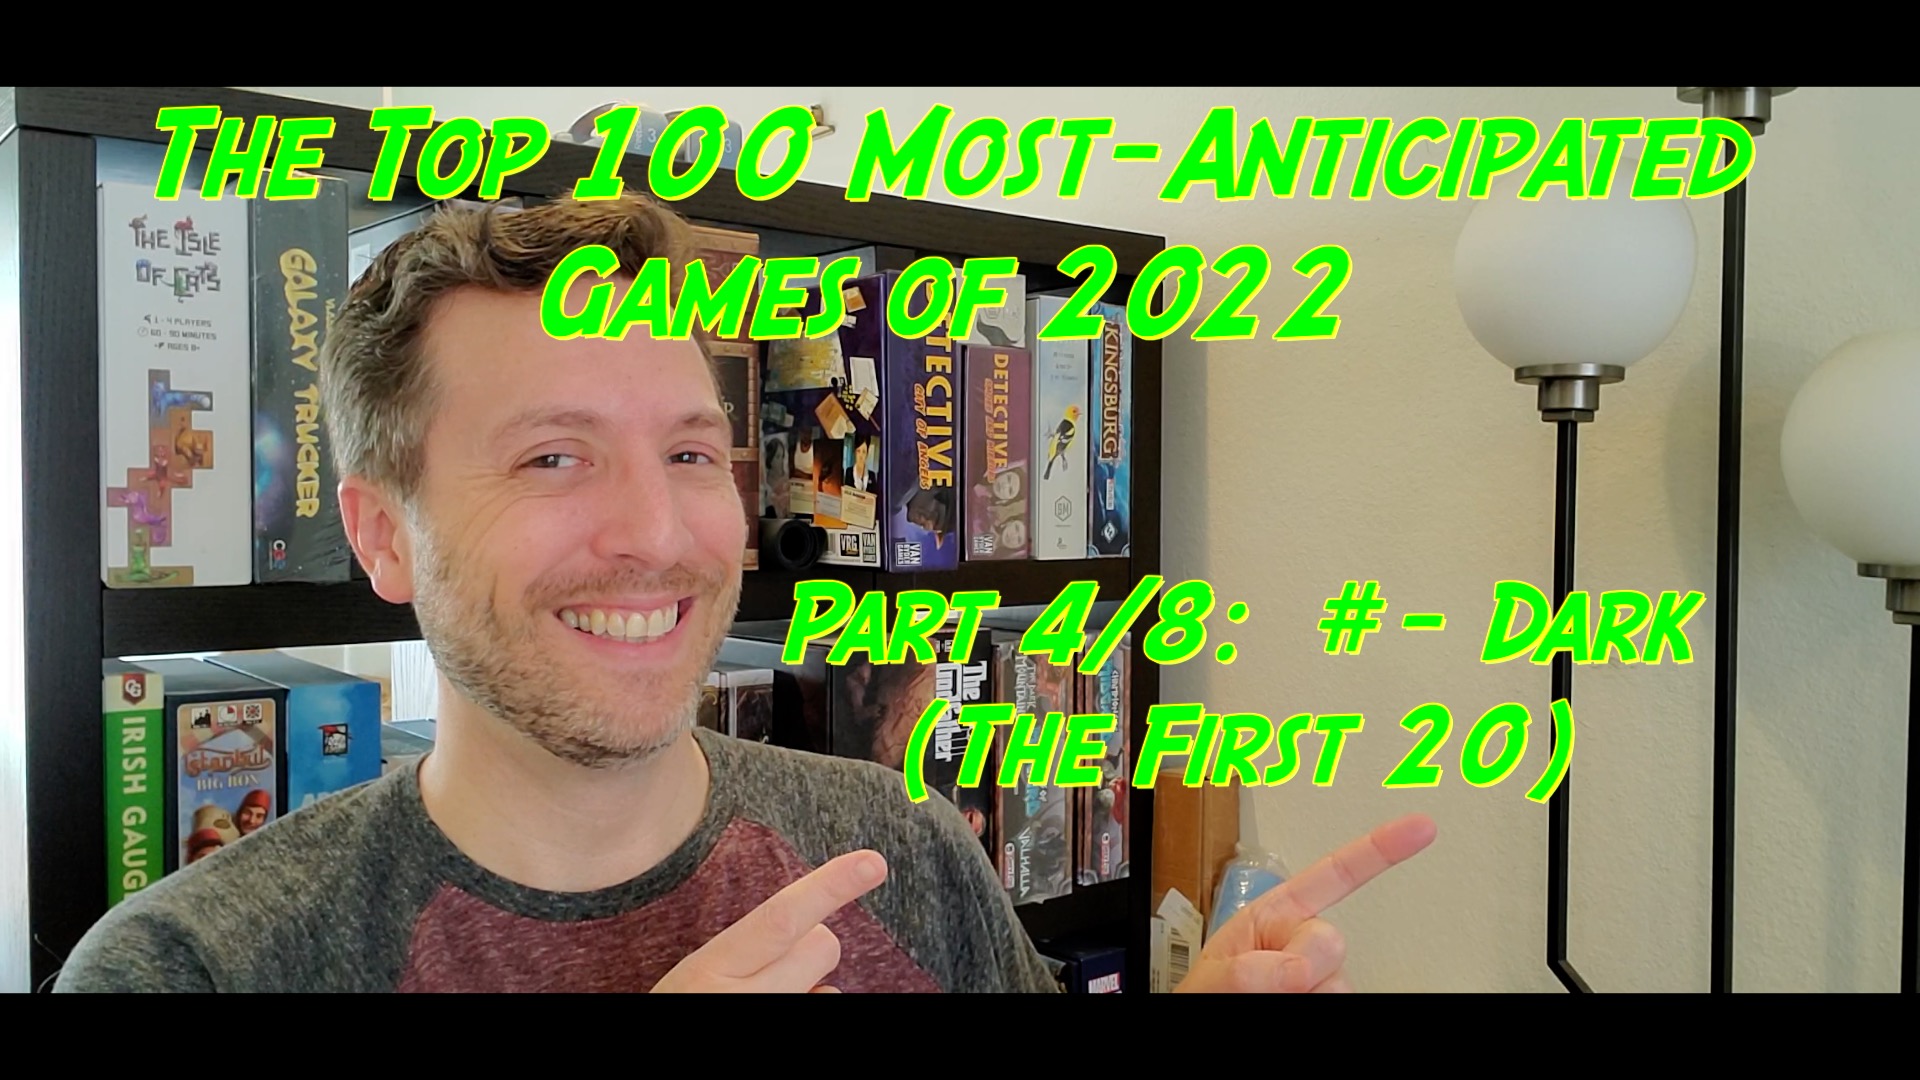 The Top 100 Most-Anticipated Games of 2022, Part 4/8: # – Dark (The First 20)